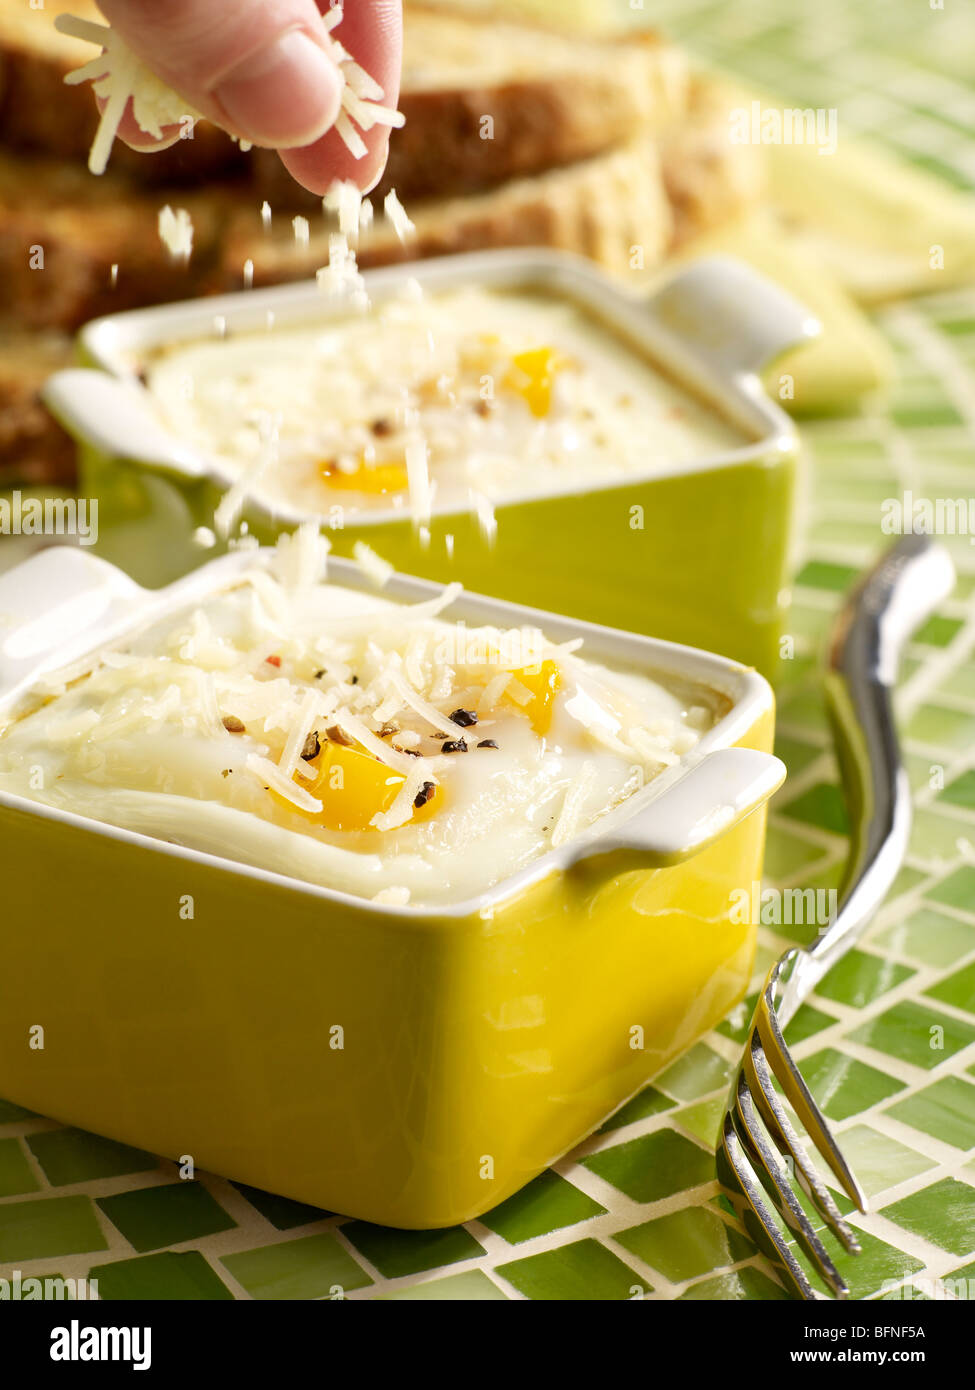 Baked Eggs with Parmesan sprinkling Stock Photo